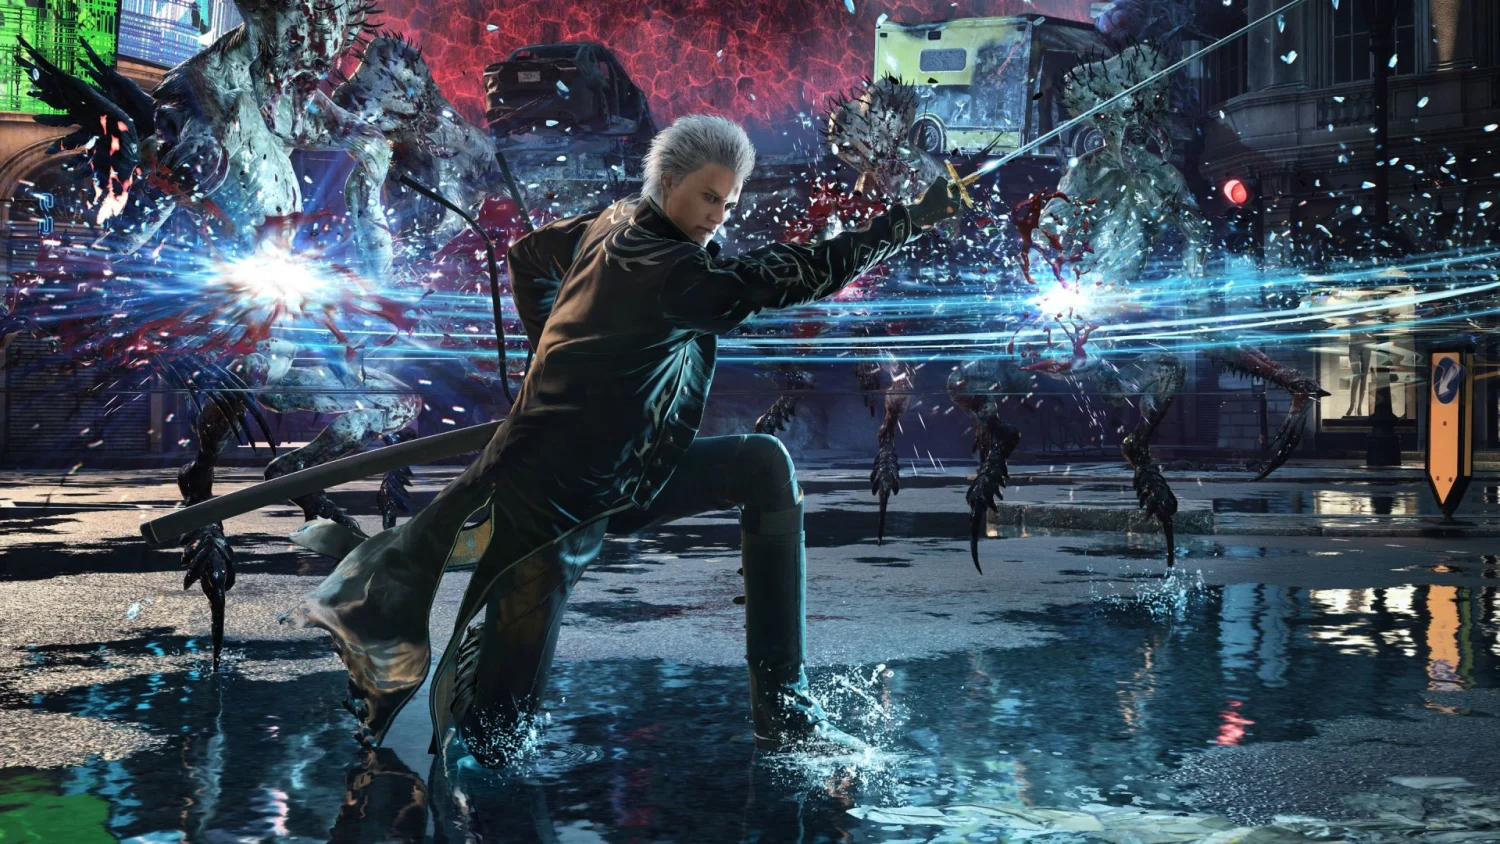 Jogo Devil May Cry 5 Special Edition PS5